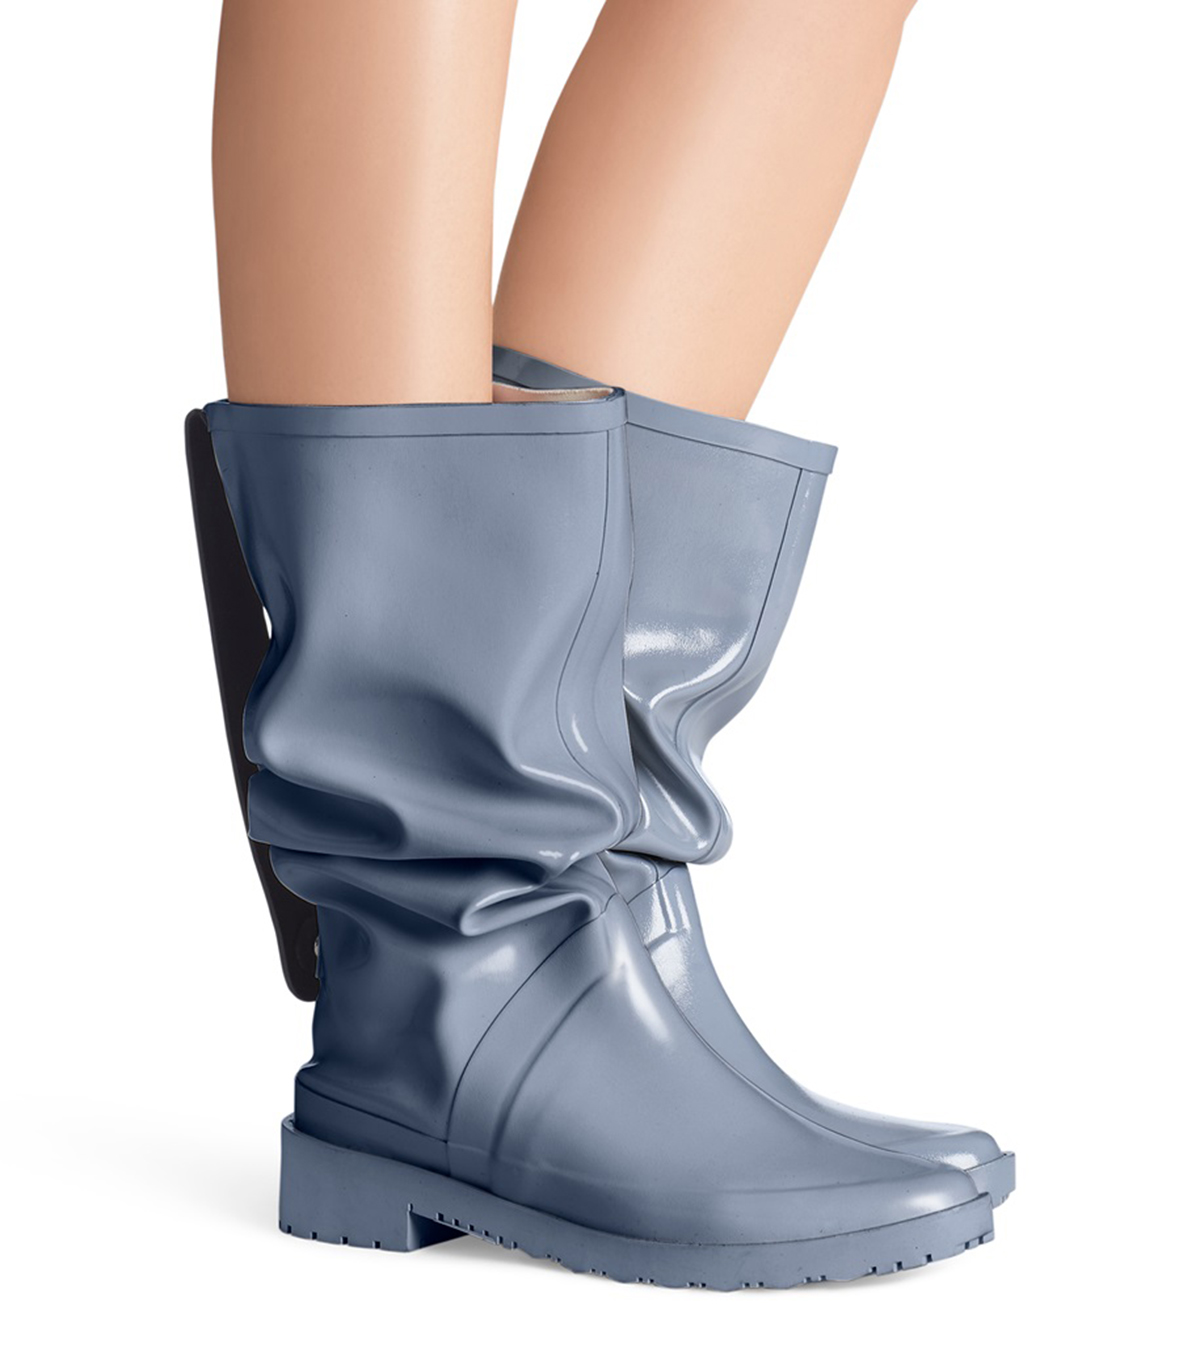 These Designer Rain Boots Are Selling 